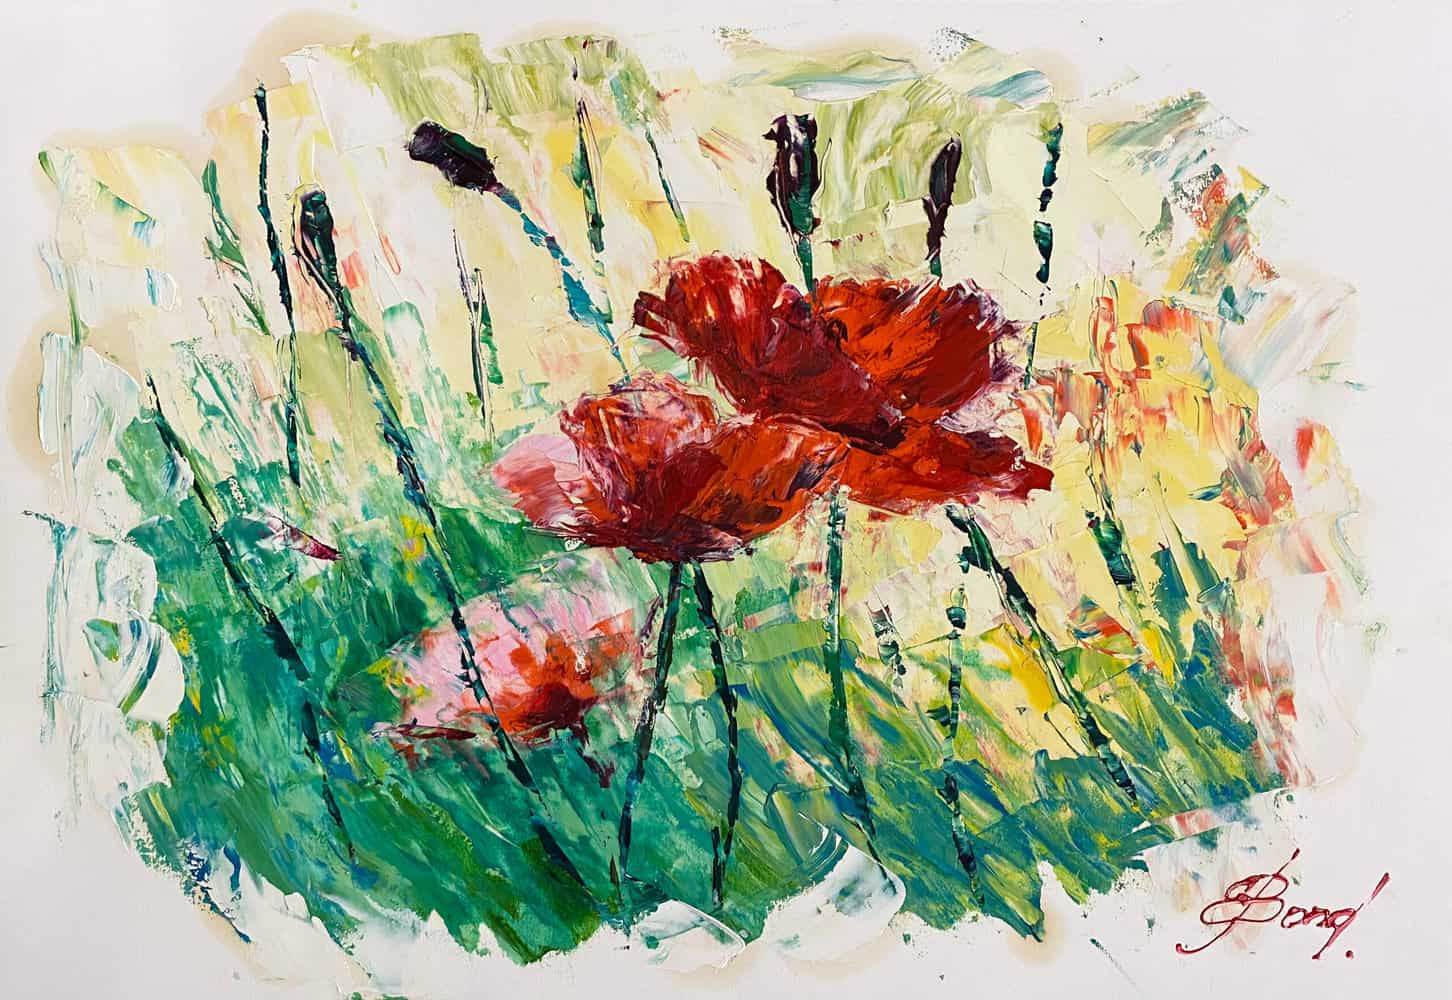 Buy a print of red flowers called Red Dancers